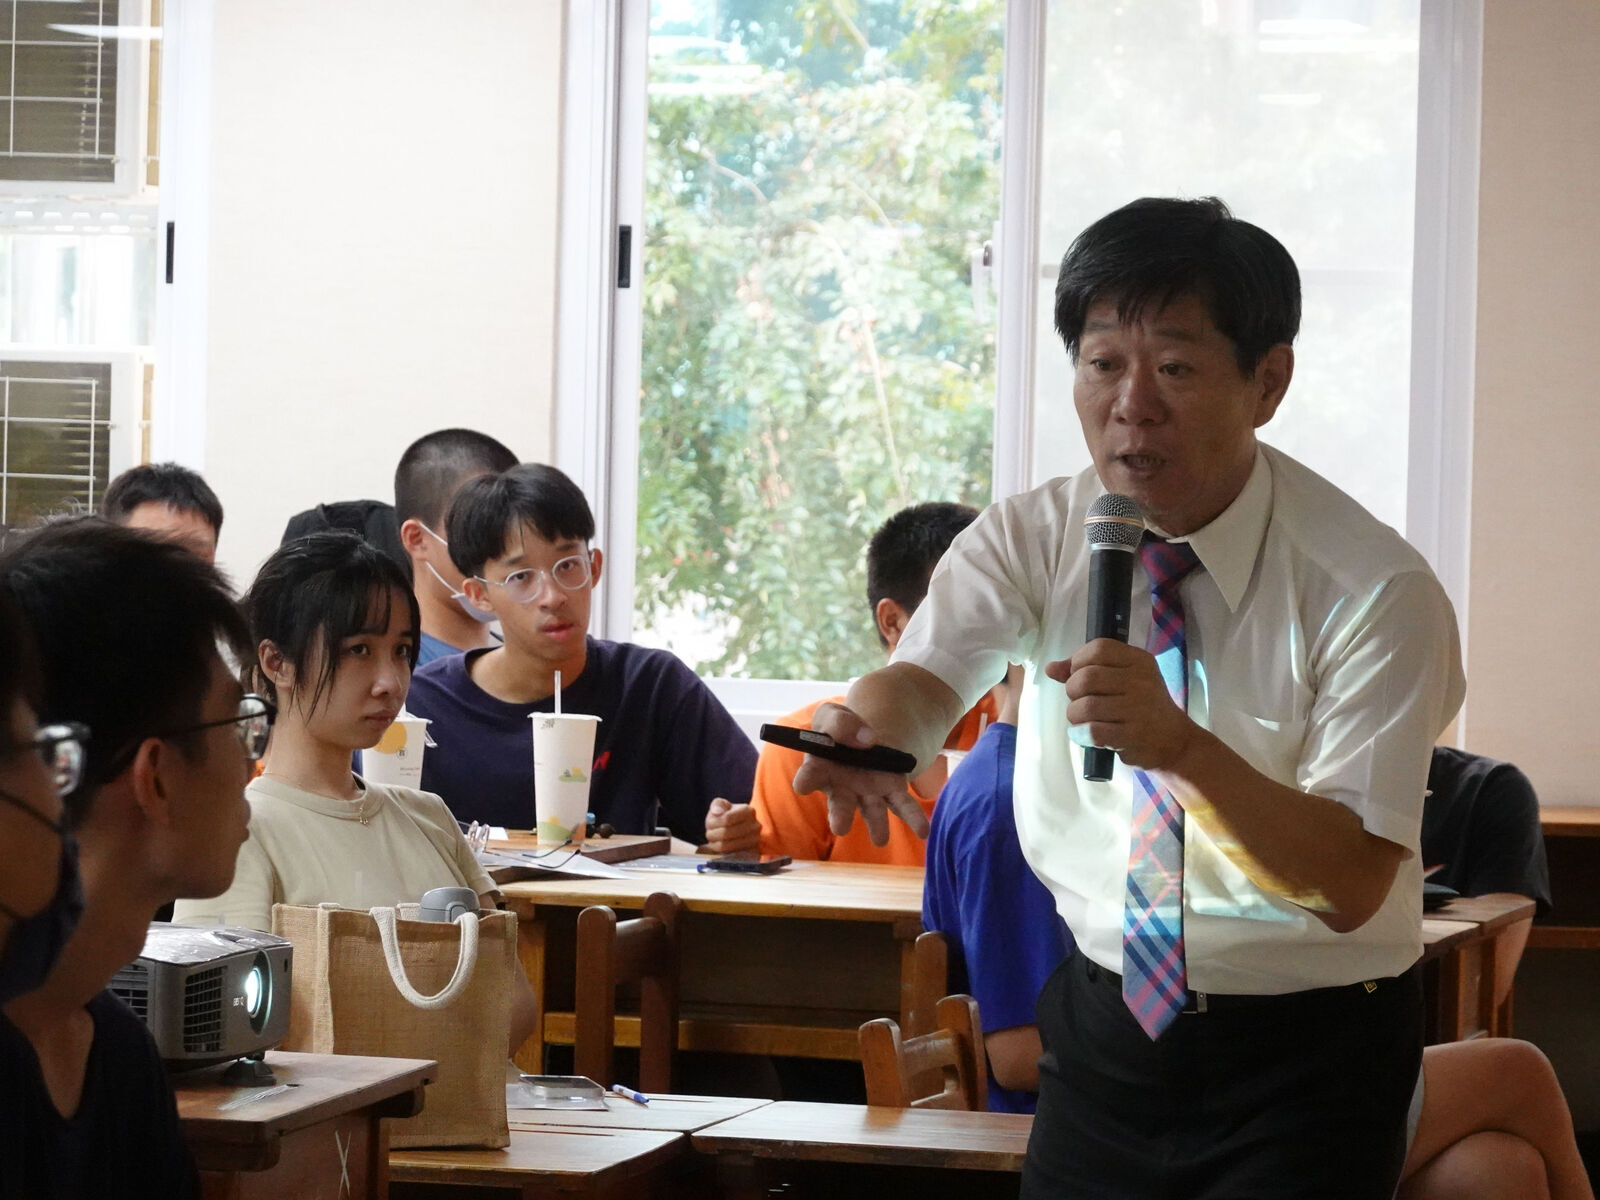 Curator Chin-Shan Huang conducted pre-service training sessions for NSYSU tutors